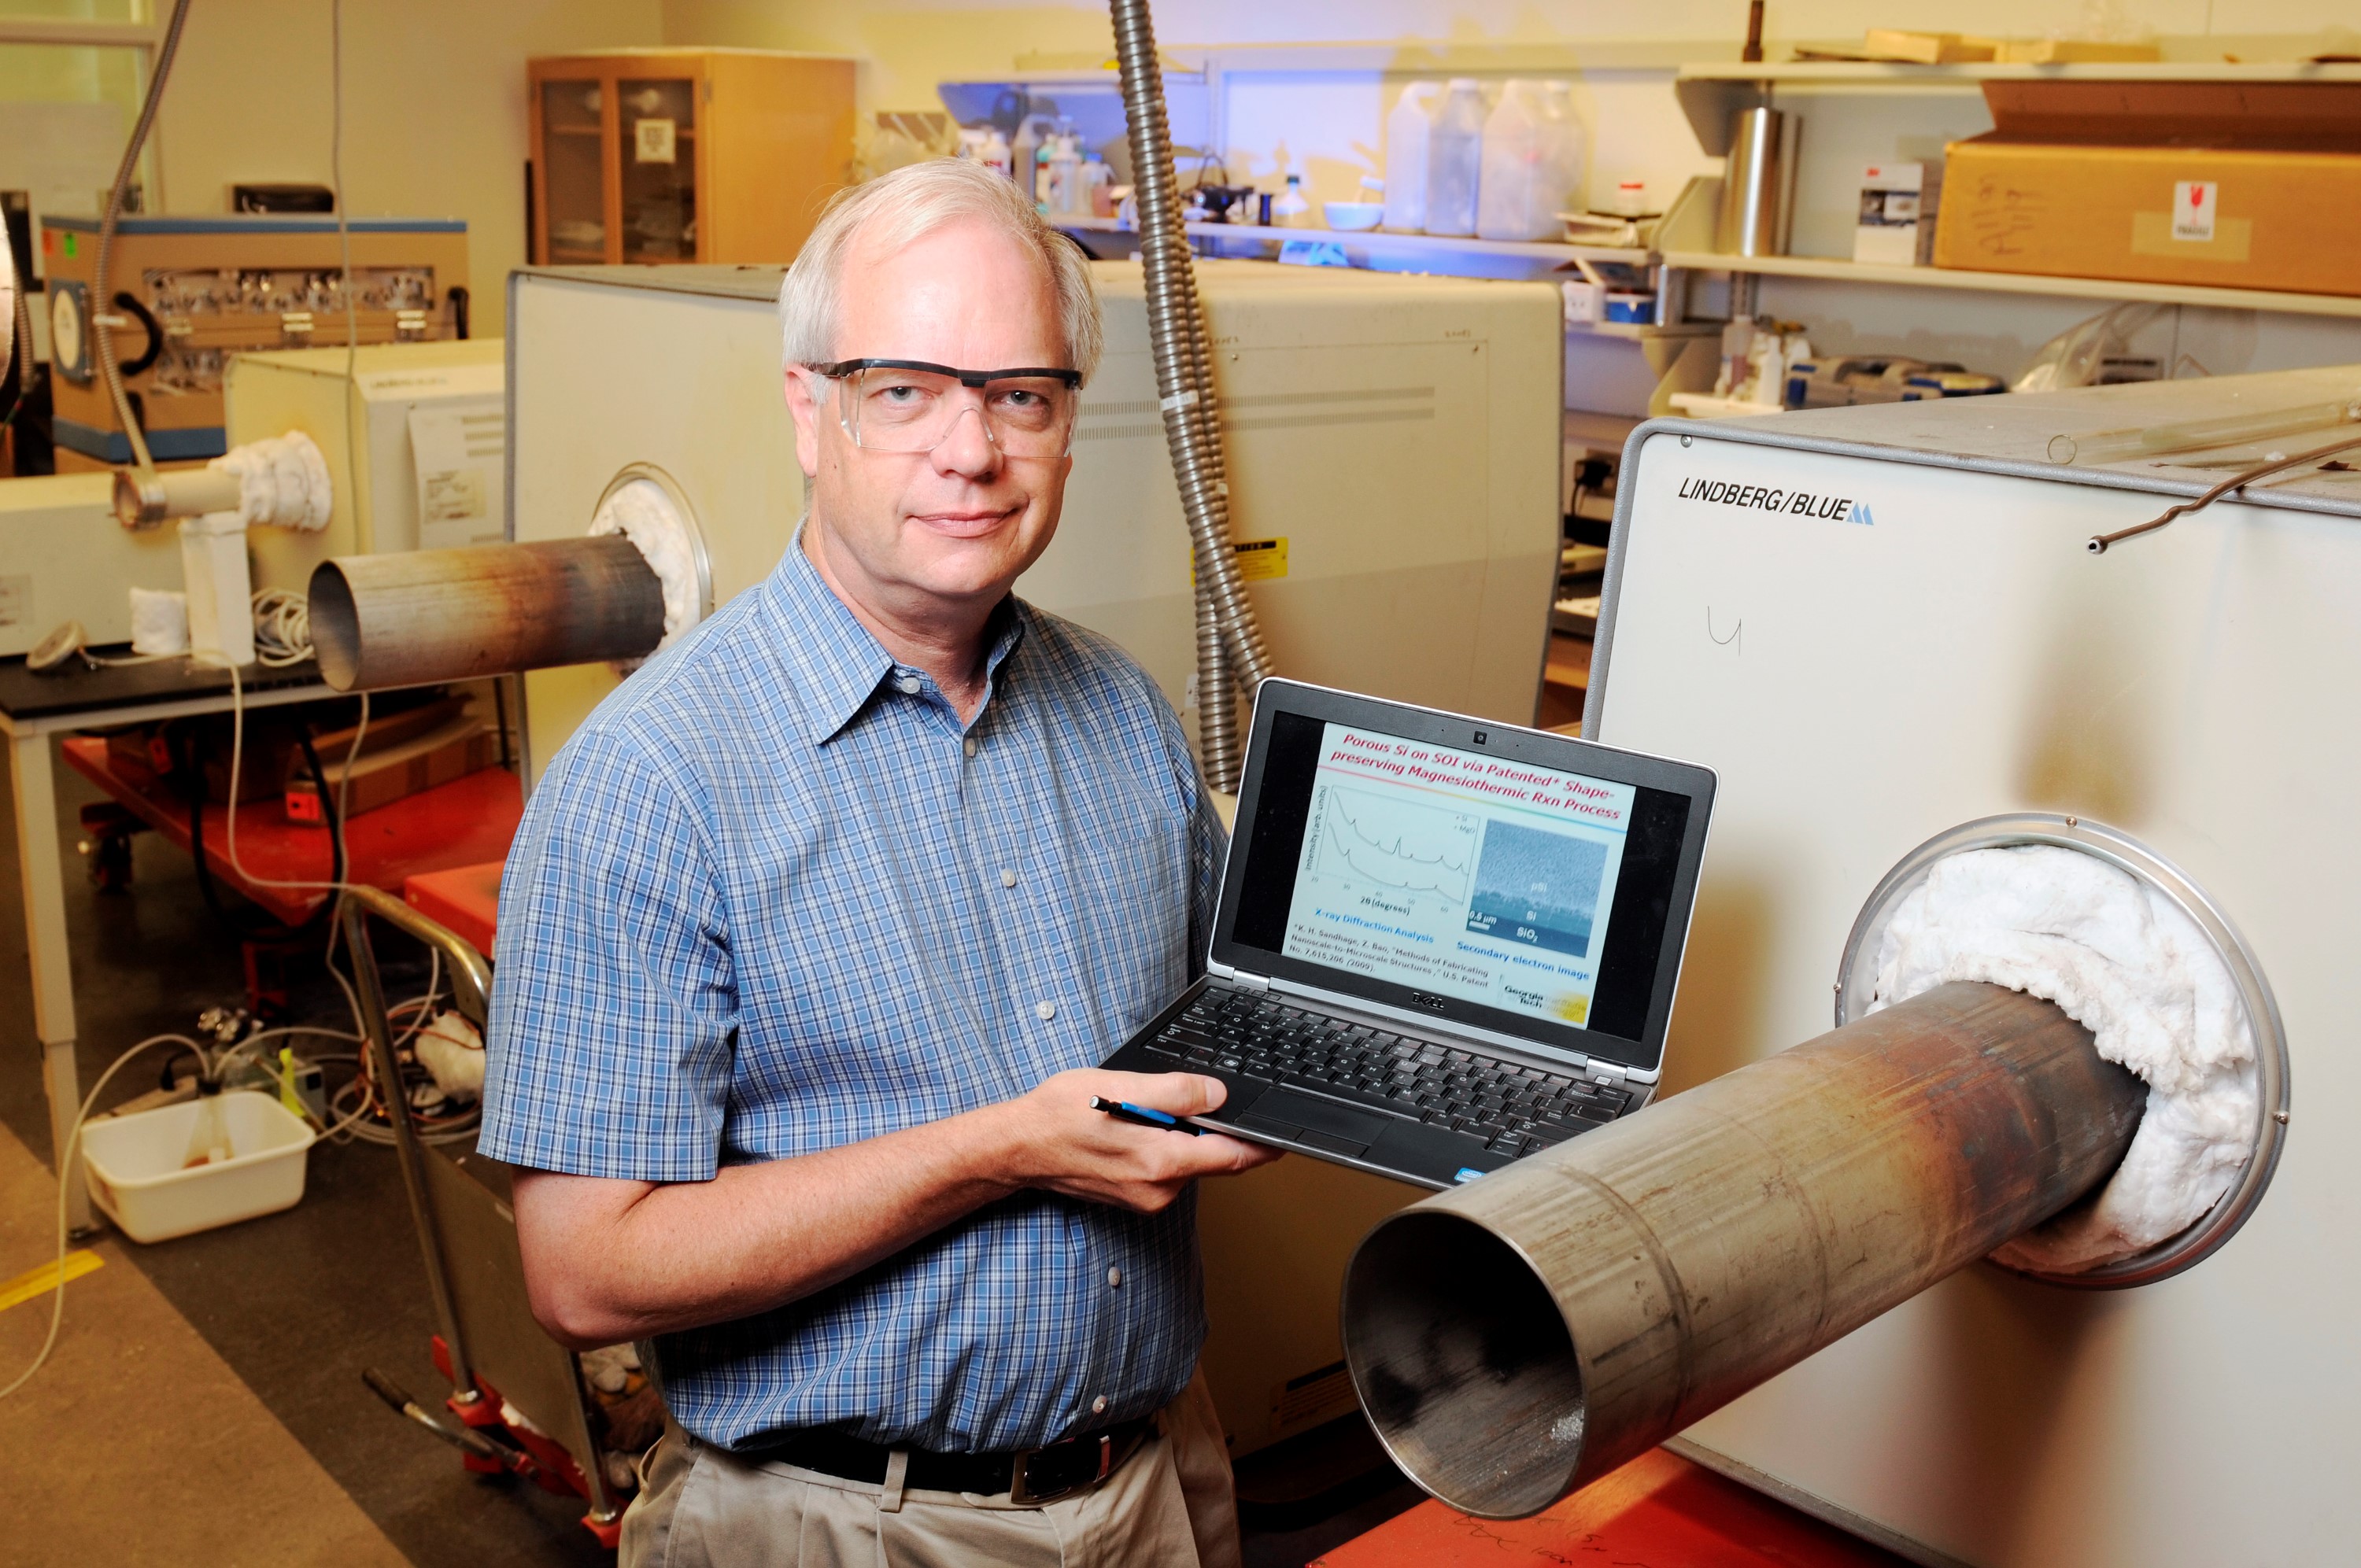 Professor Ken Sandhage, standing near tube furnaces in the Molecular Science and Engineering Building at Georgia Tech, shows a slide demonstrating the ability to generate a porous silicon film on top of a dense silicon layer by selectively reacting silicon dioxide on the dense layer. (Credit: Gary Meek)